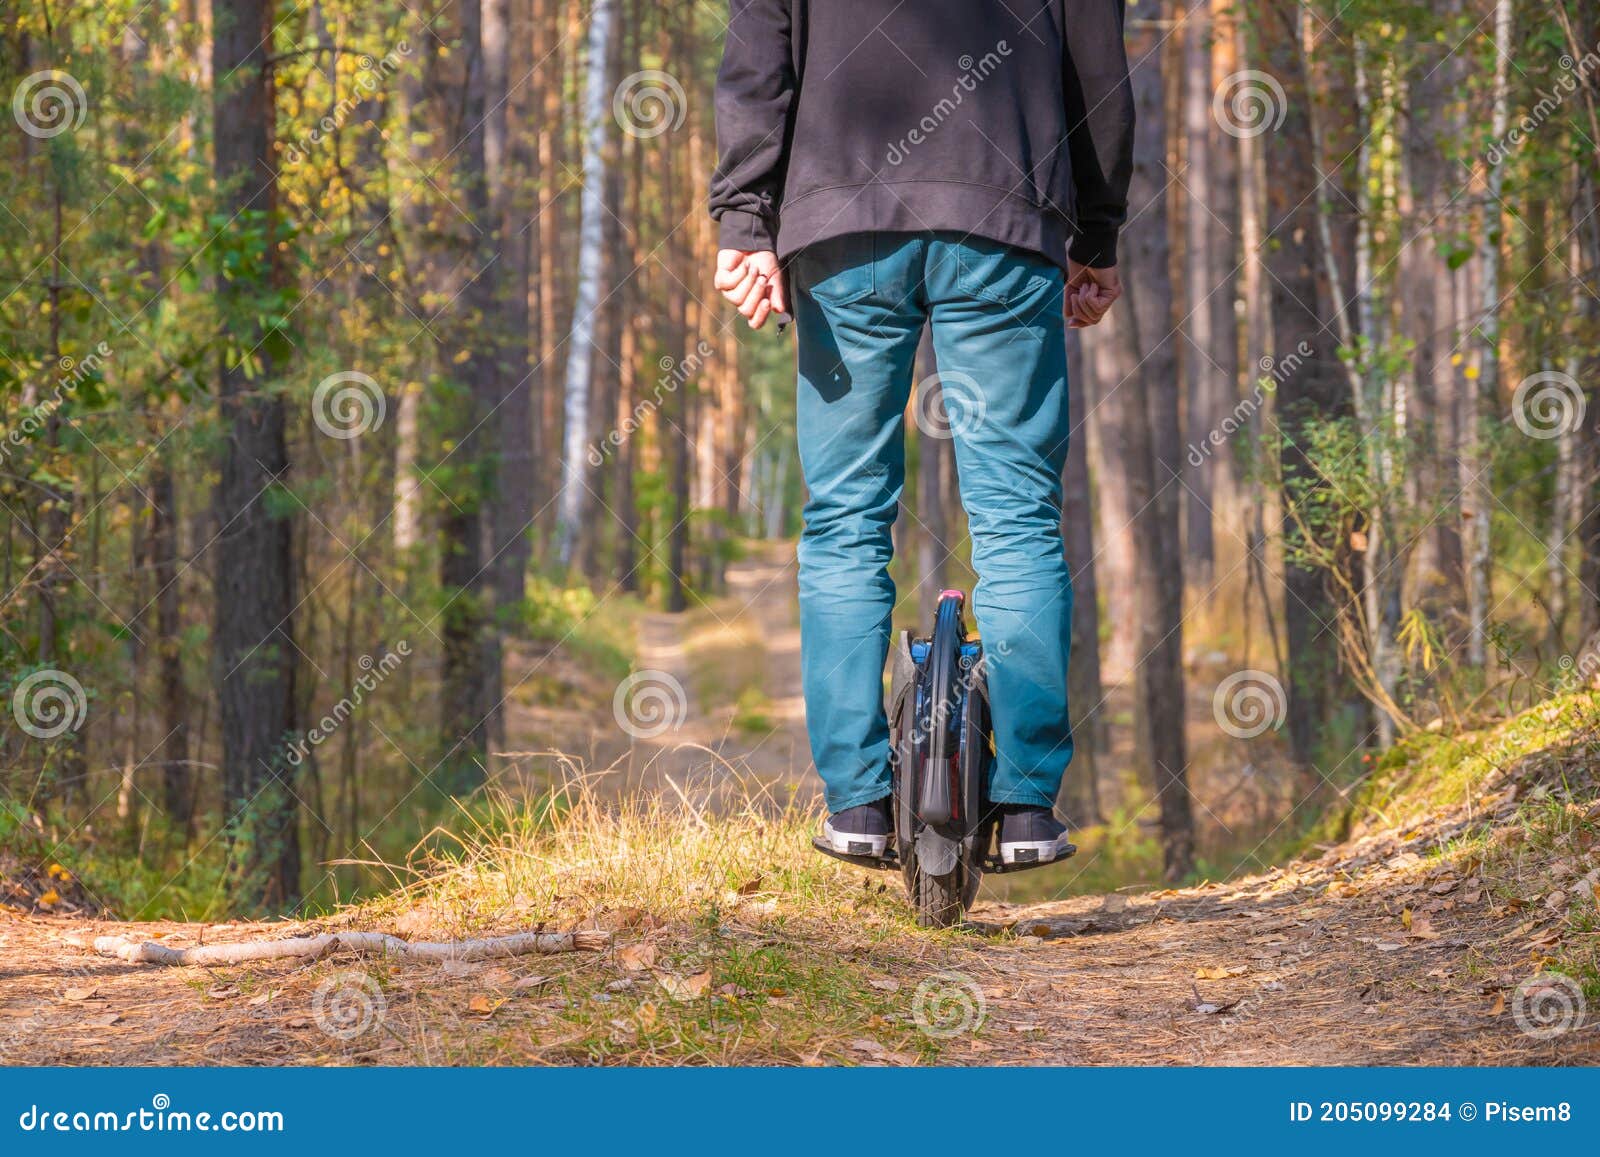 rear view of a man on an electric unicycle